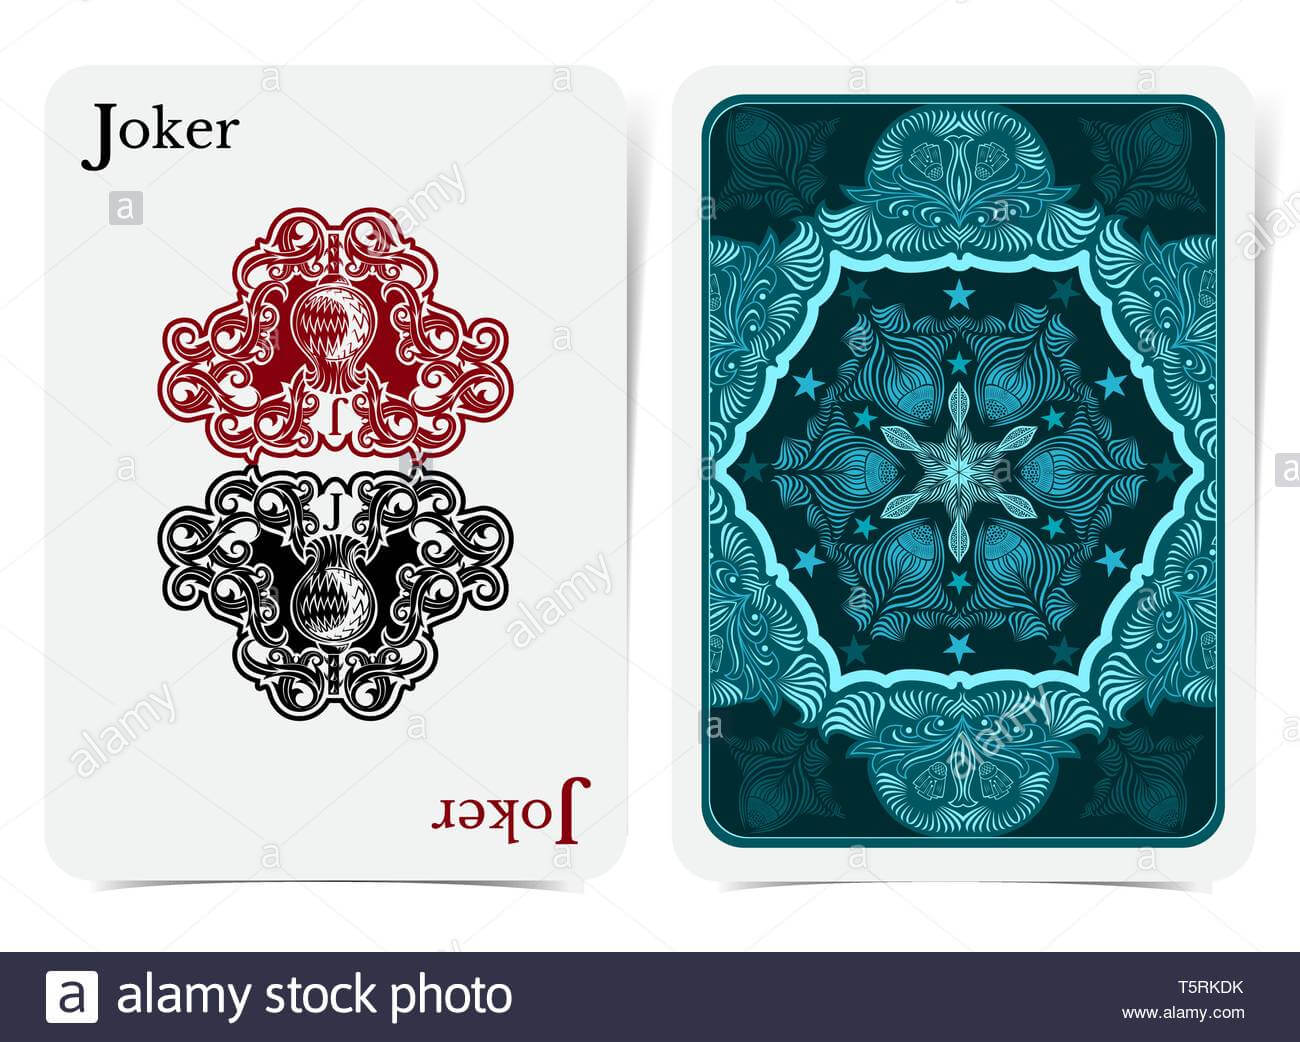 Card Face Of Joker With Thistle Plant Pattern Inside With With Joker Card Template